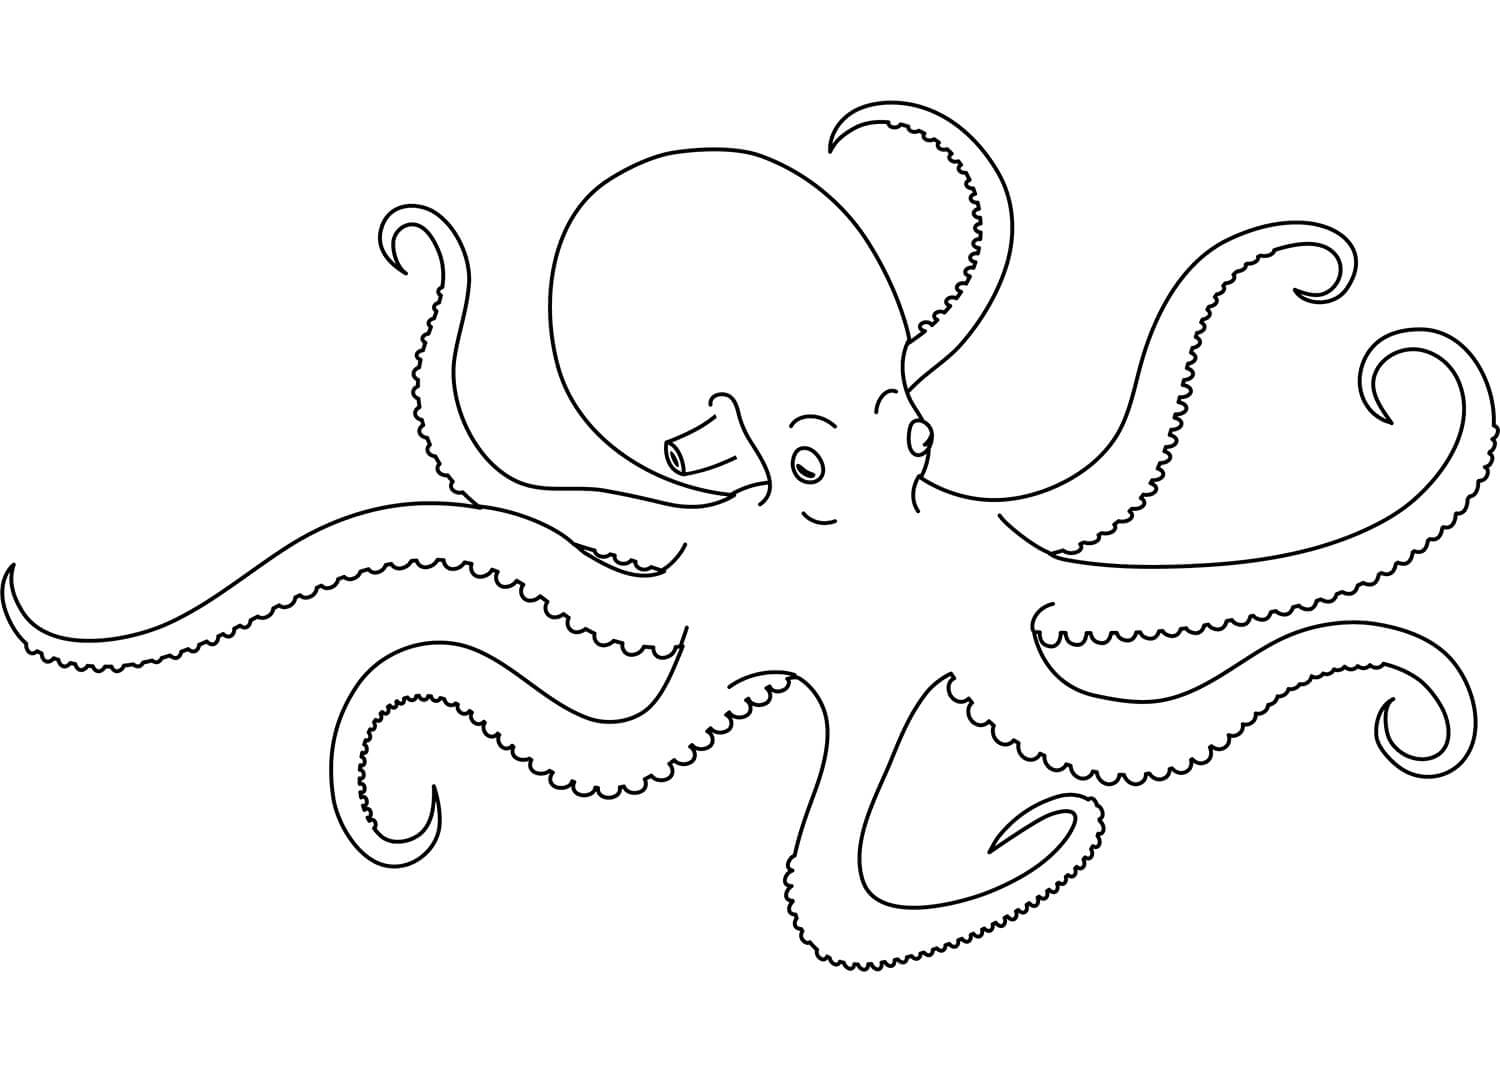 Free Octopus coloring page - Download, Print or Color Online for Free